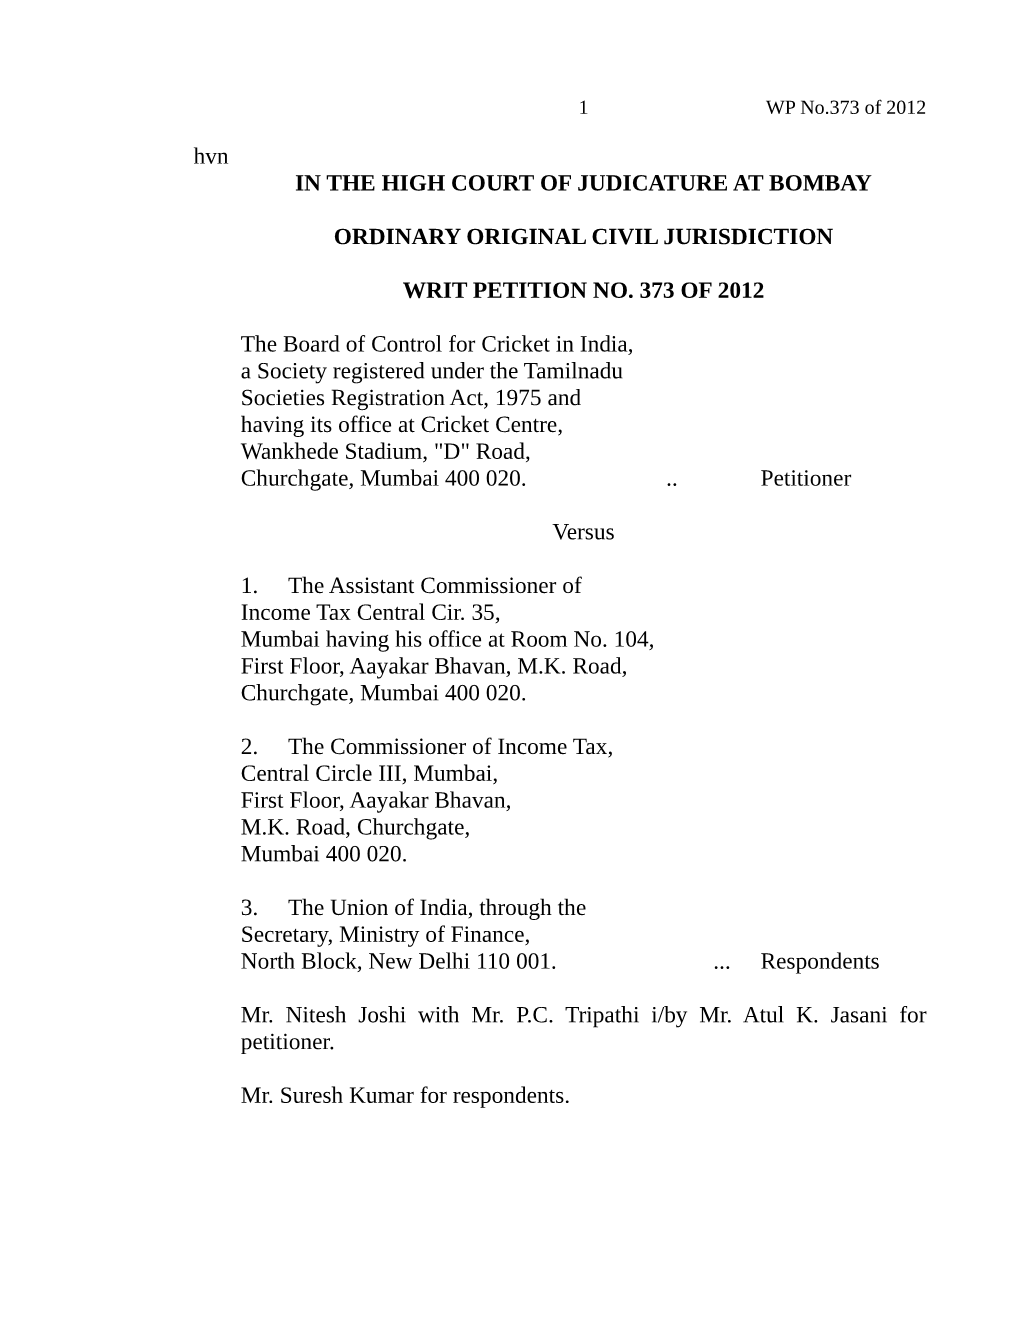 Hvn in the HIGH COURT of JUDICATURE at BOMBAY